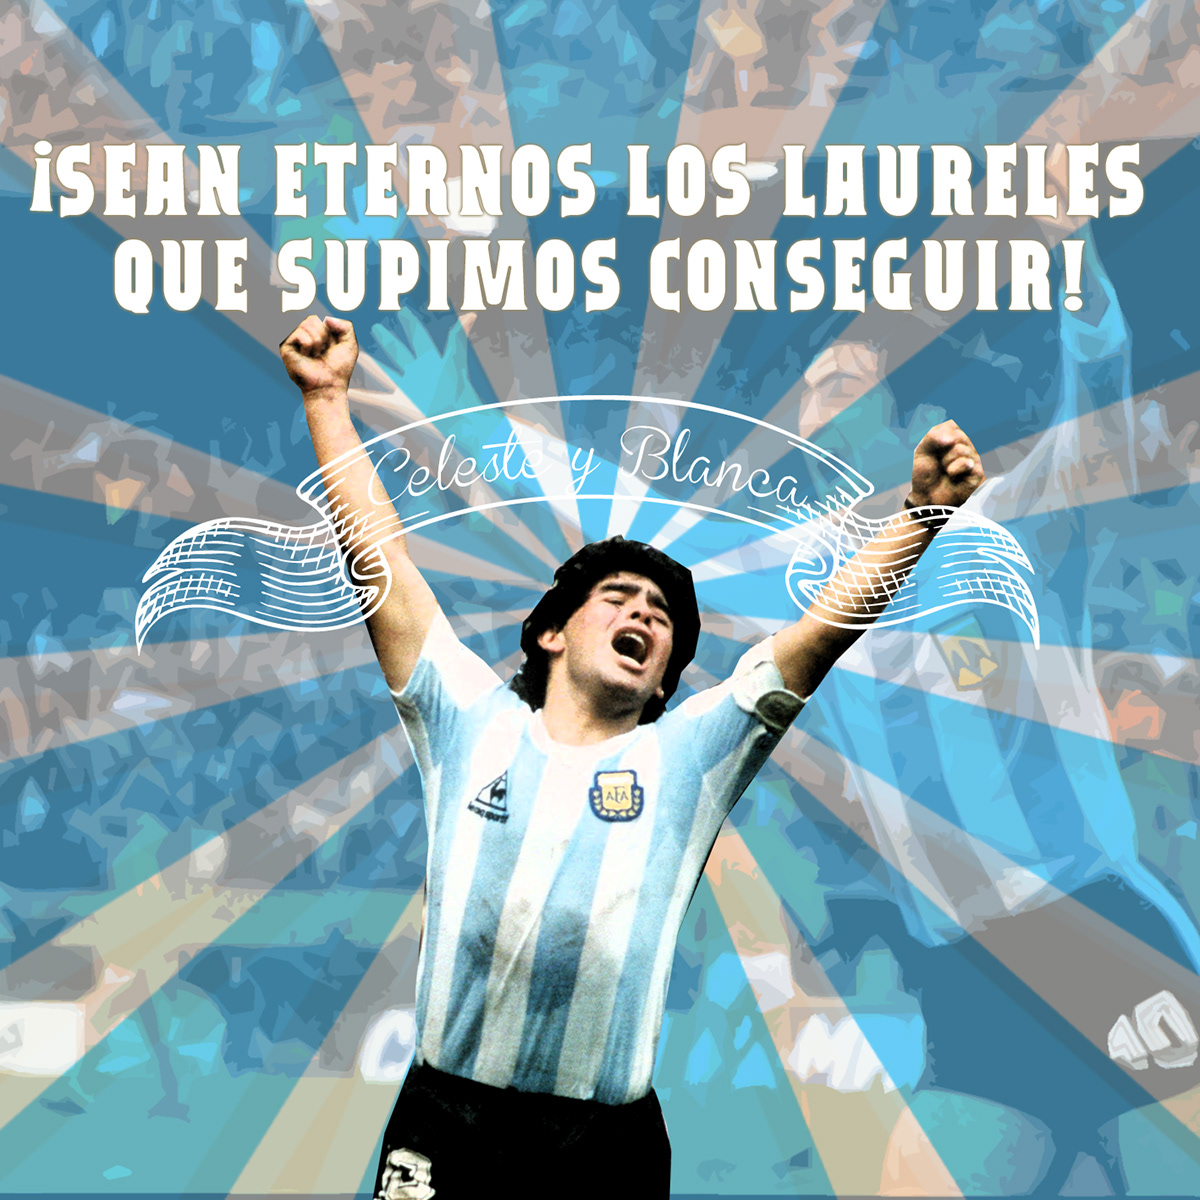 football WorldCup graphics Anthems mexico uruguay Brazil argentina soccer nation pride